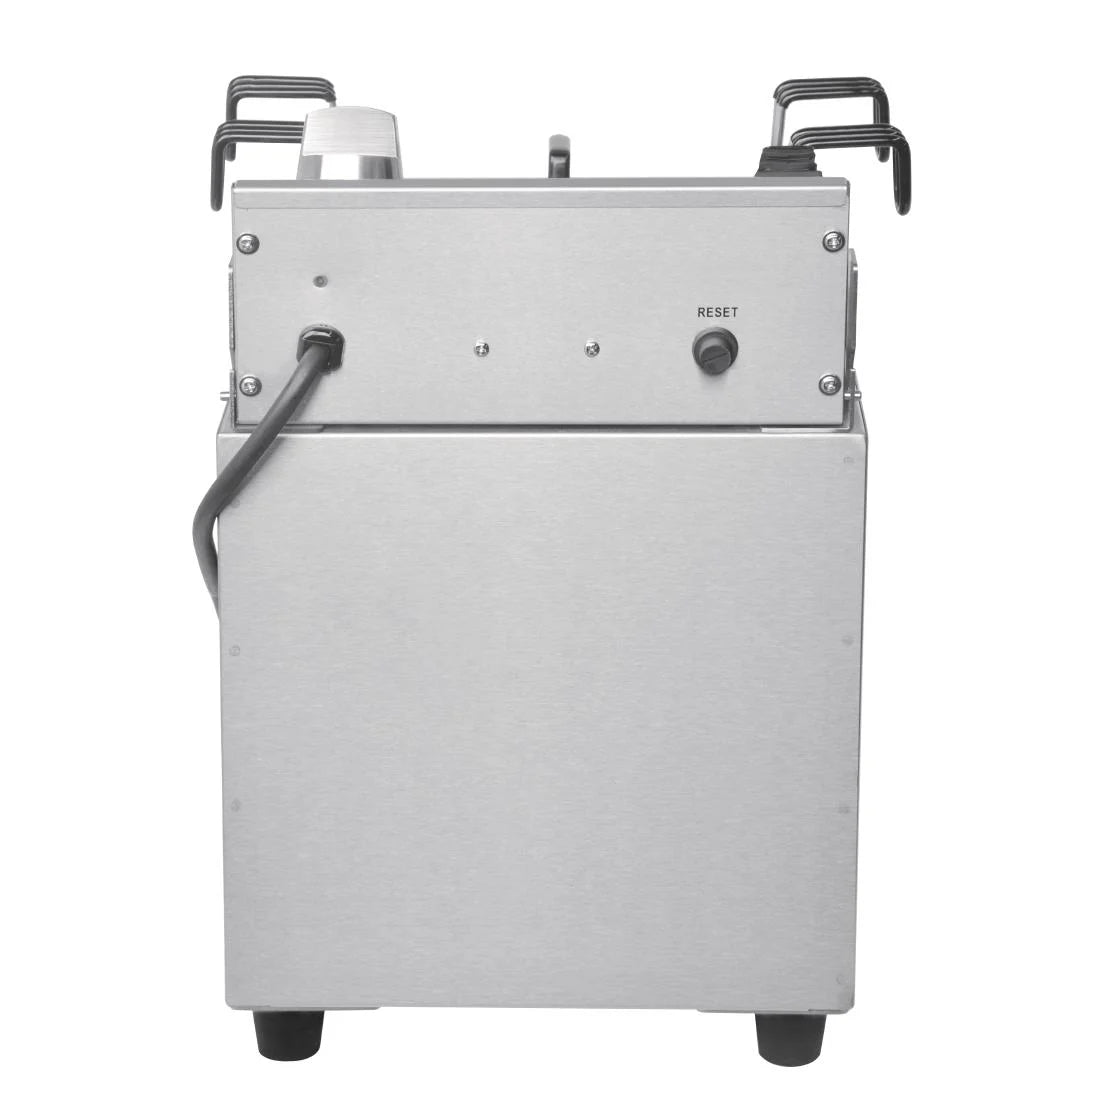 DB191 Buffalo Pasta Cooker 8Ltr with Tap and Timer JD Catering Equipment Solutions Ltd